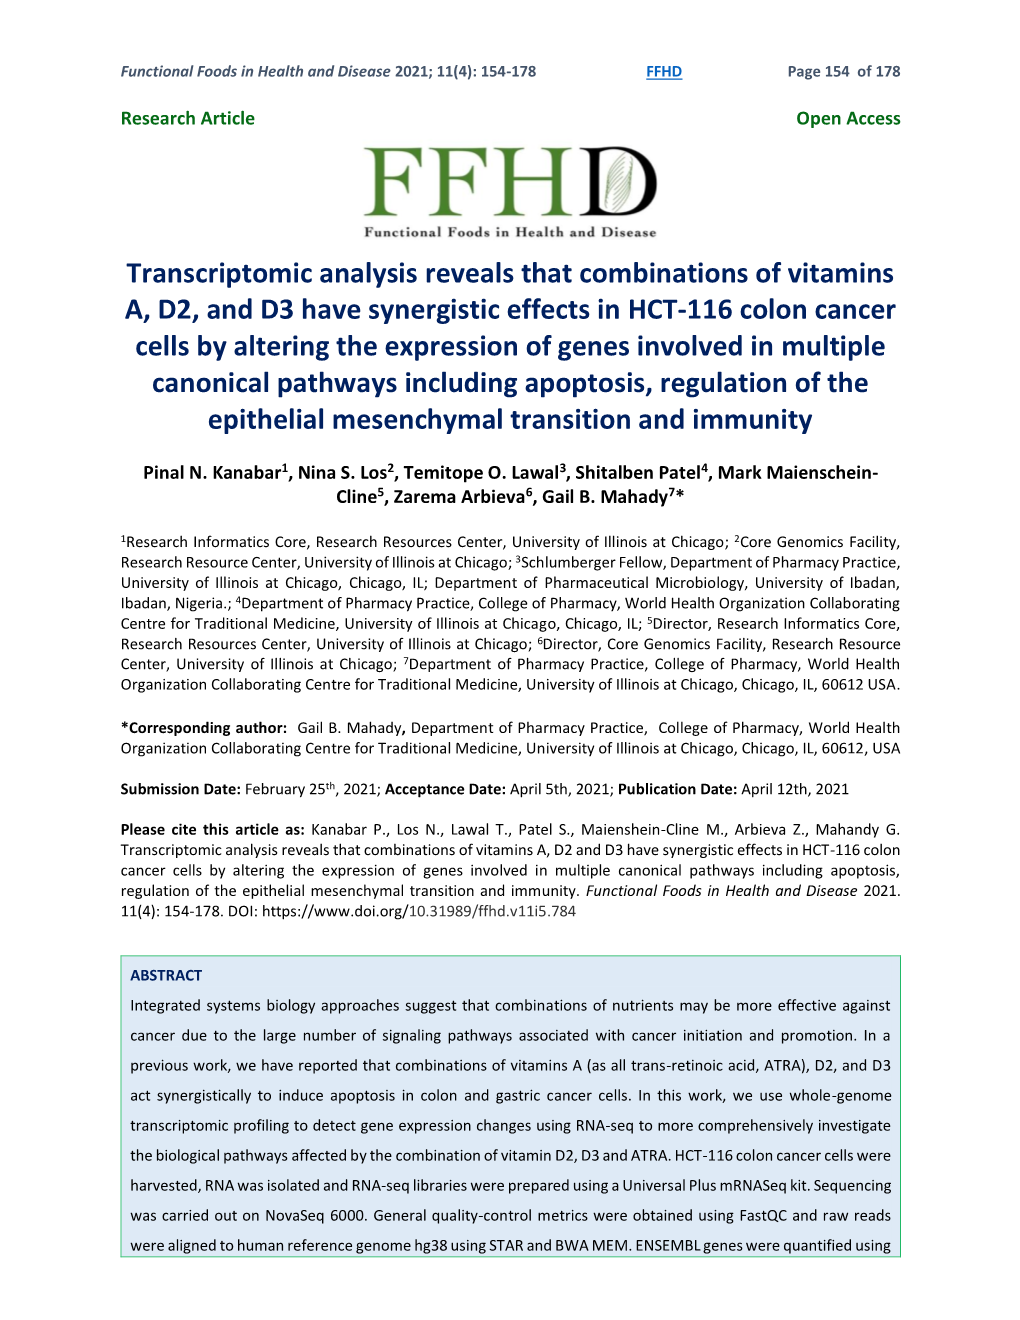 Transcriptomic Analysis Reveals That Combinations of Vitamins A, D2, And